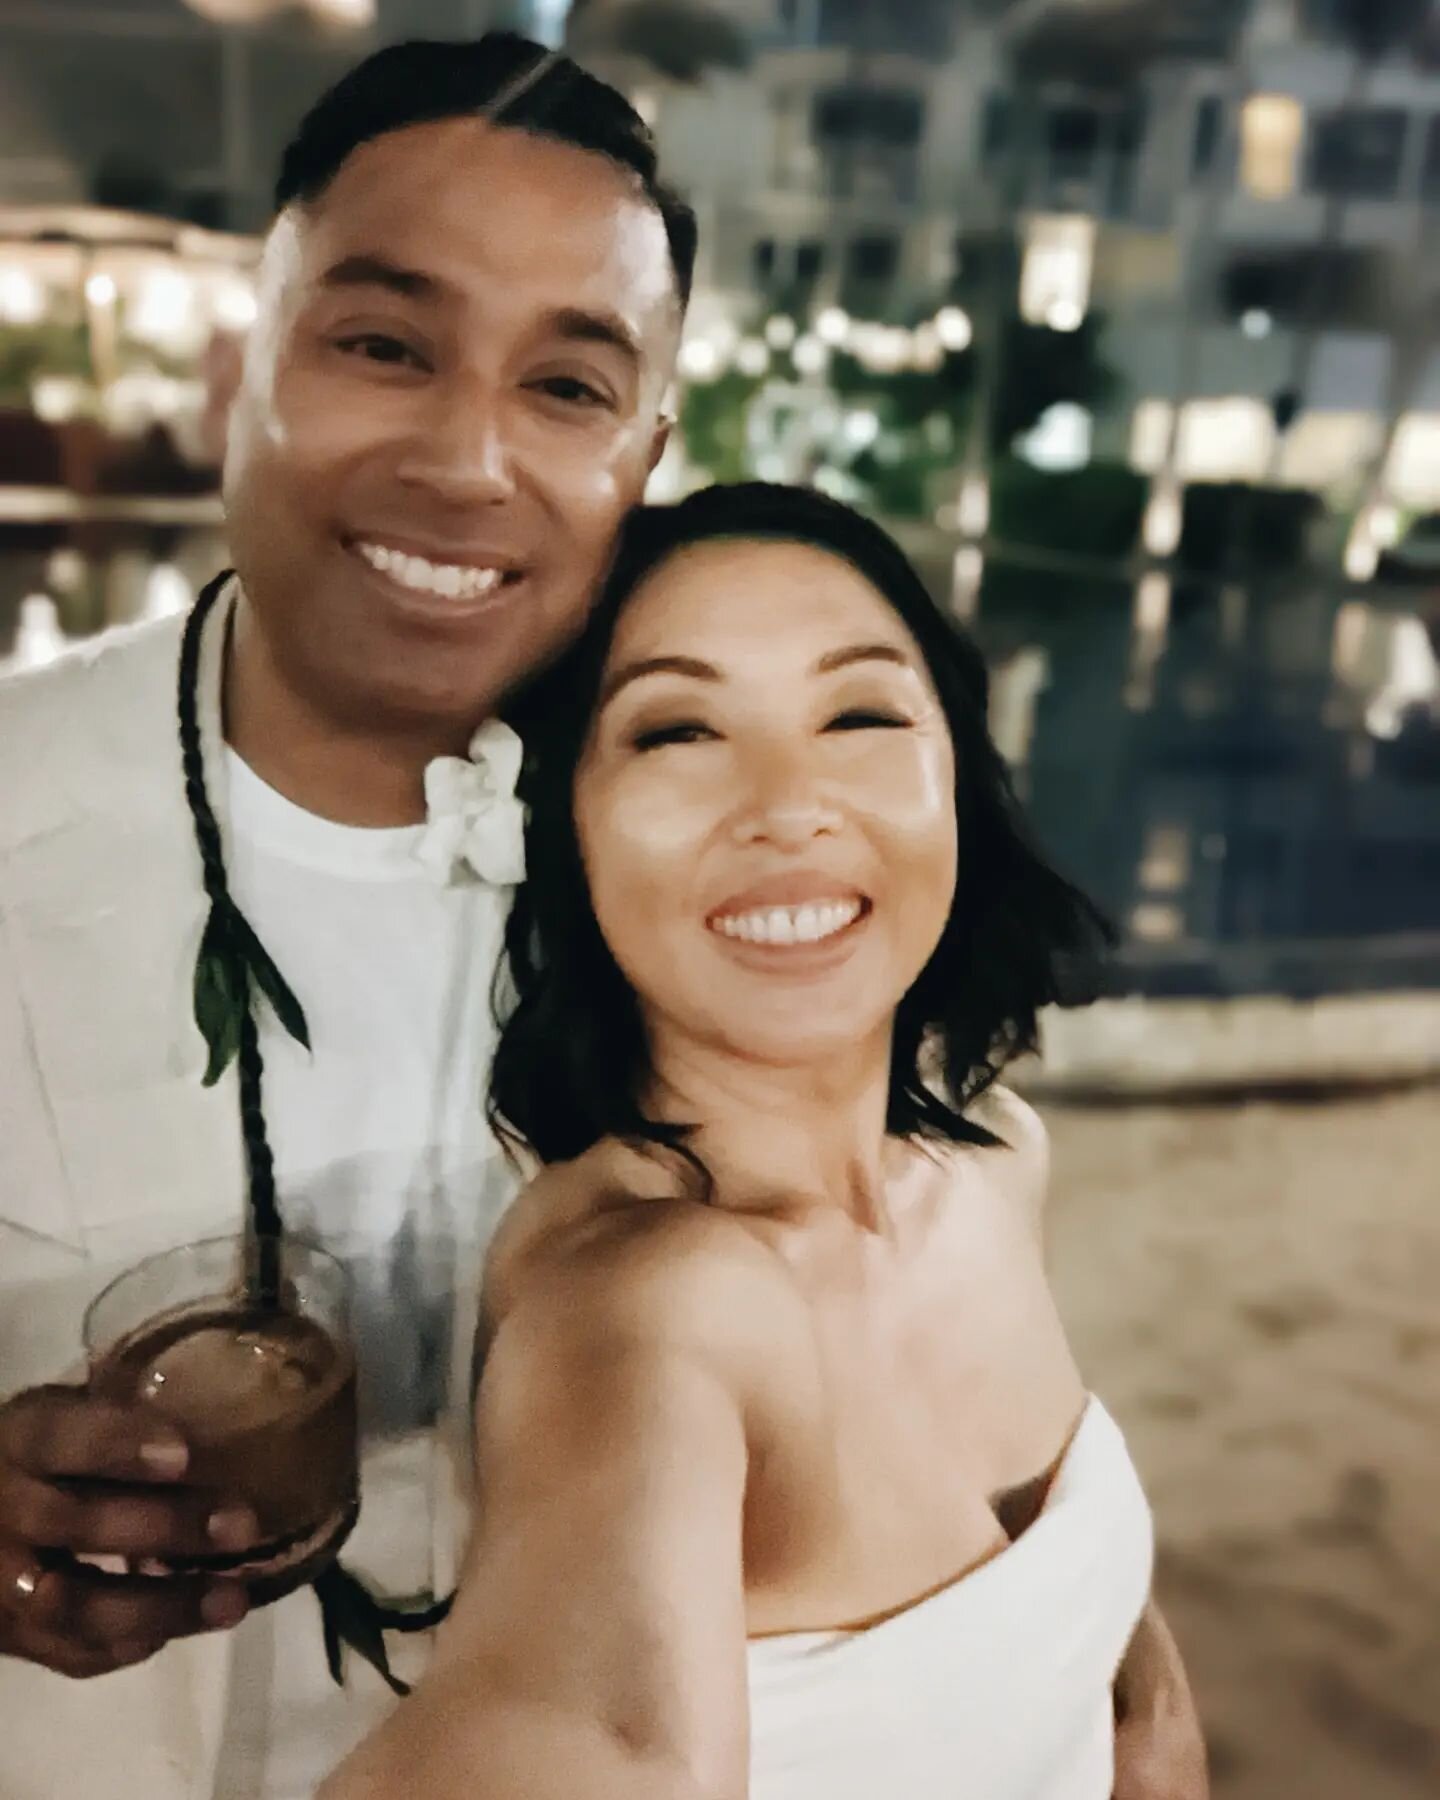 we 𝒔𝒕𝒊𝒍𝒍 do...cheers to 10 years to the love of my life...just wow.